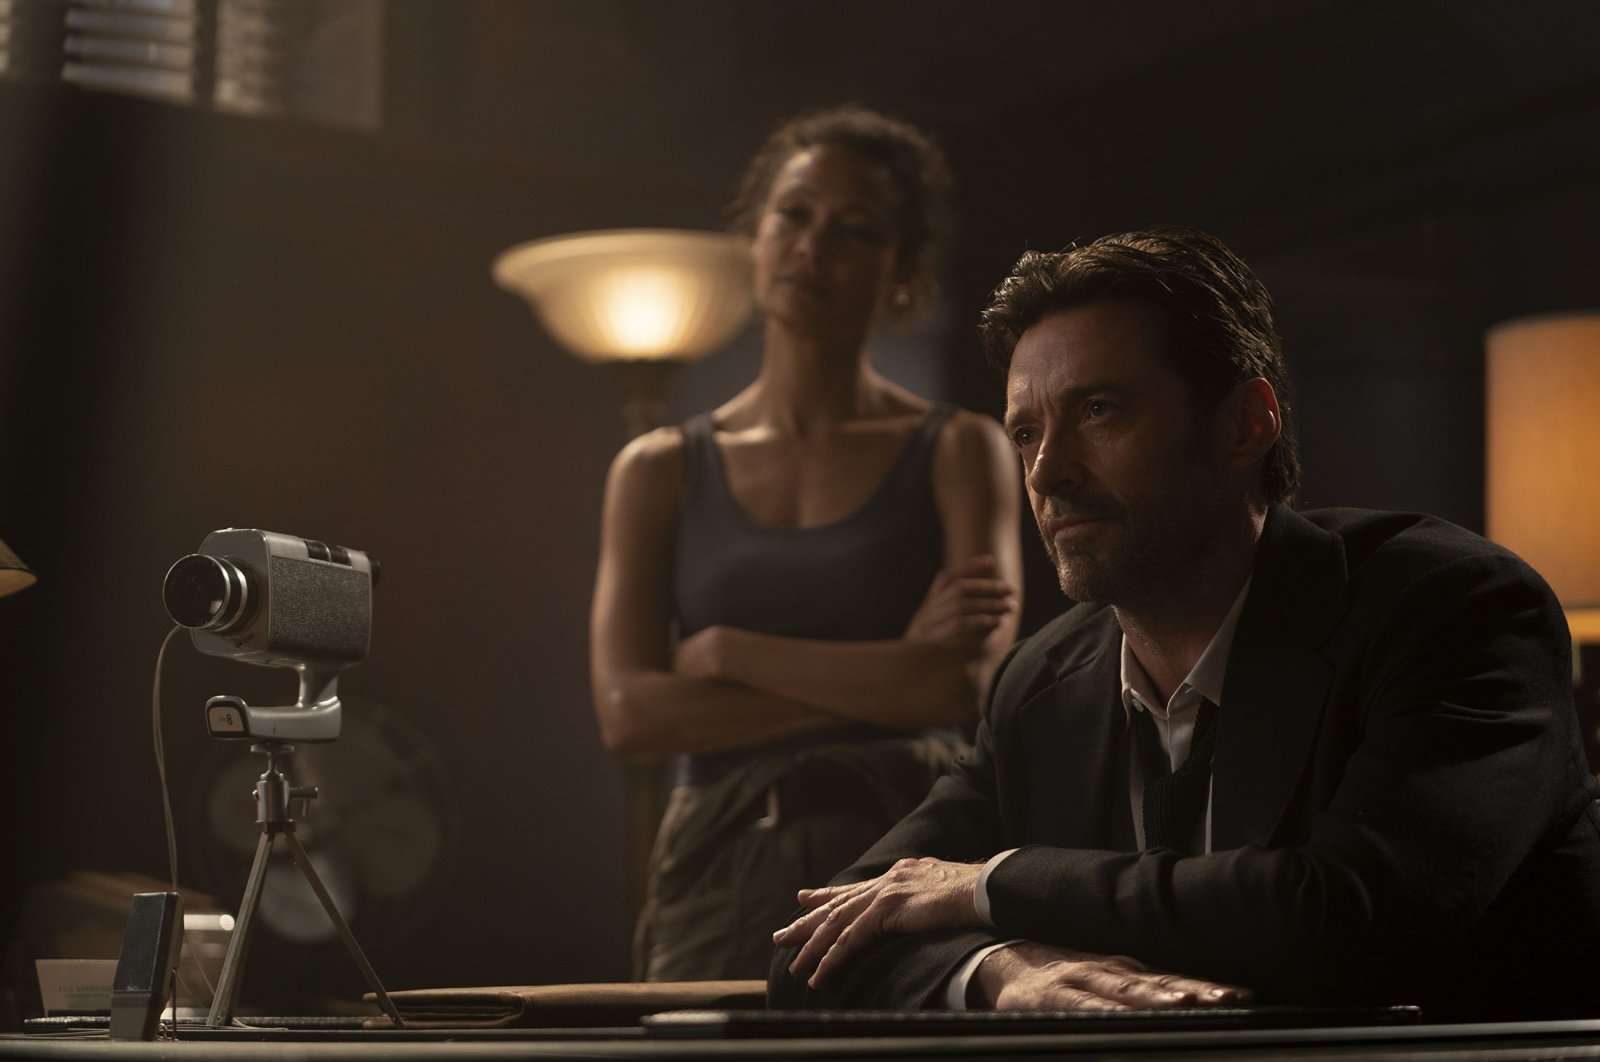 Thandiwe Newton (L) and Hugh Jackman in a scene from the film "Reminiscence." (Warner Bros. Pictures via AP)